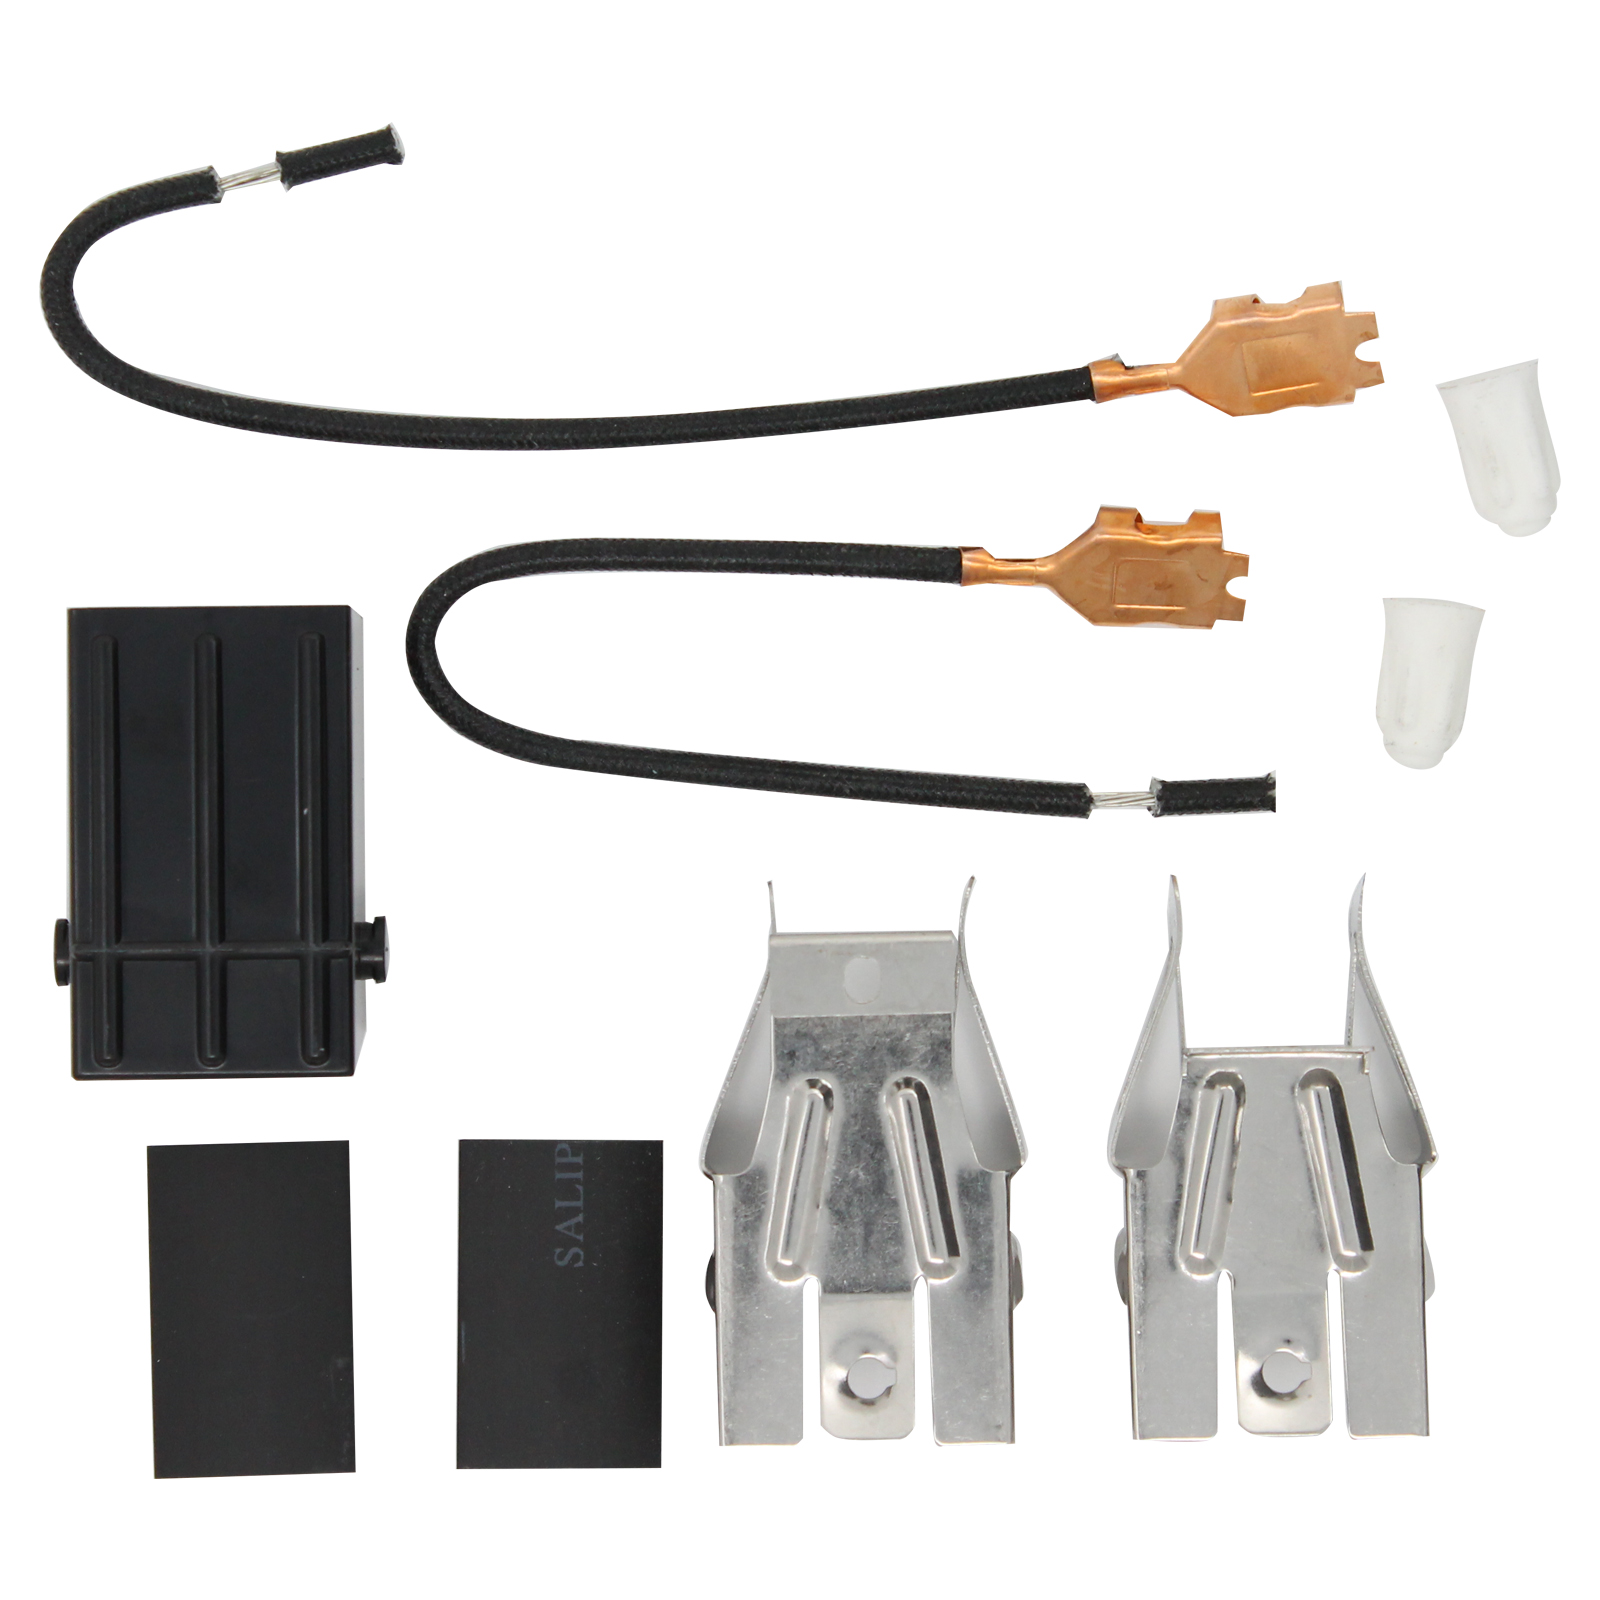 330031 Top Burner Receptacle Kit Replacement for Whirlpool RF4700XBW0 Range/Cooktop/Oven - Compatible with 330031 Range Burner Receptacle Kit - UpStart Components Brand - image 2 of 4